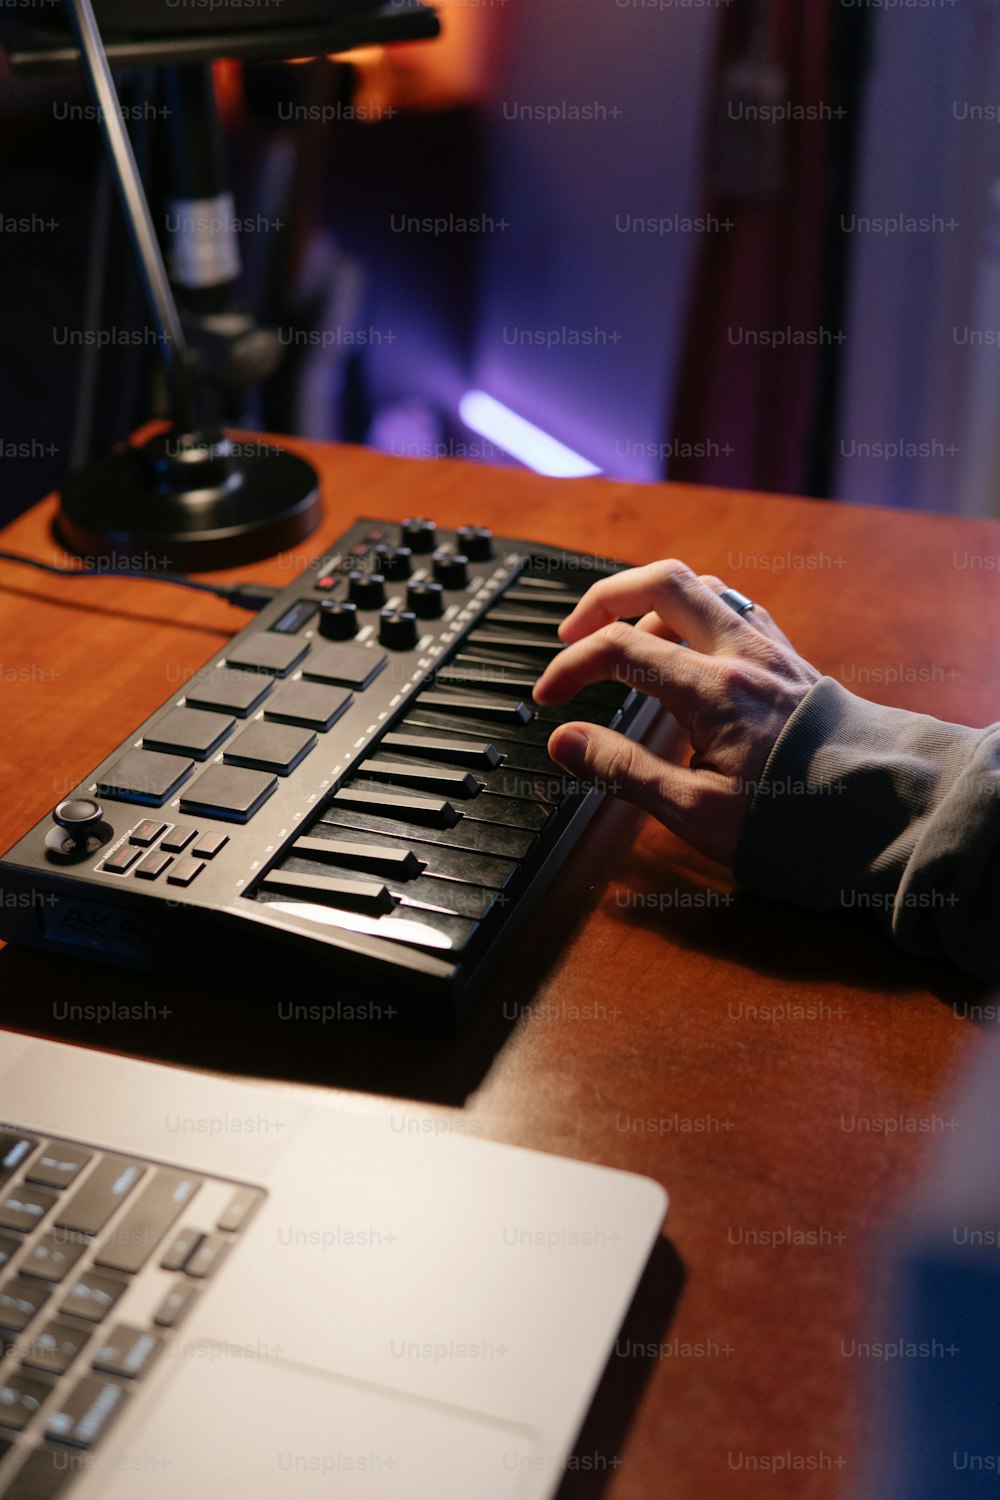 a person typing on a keyboard on a desk